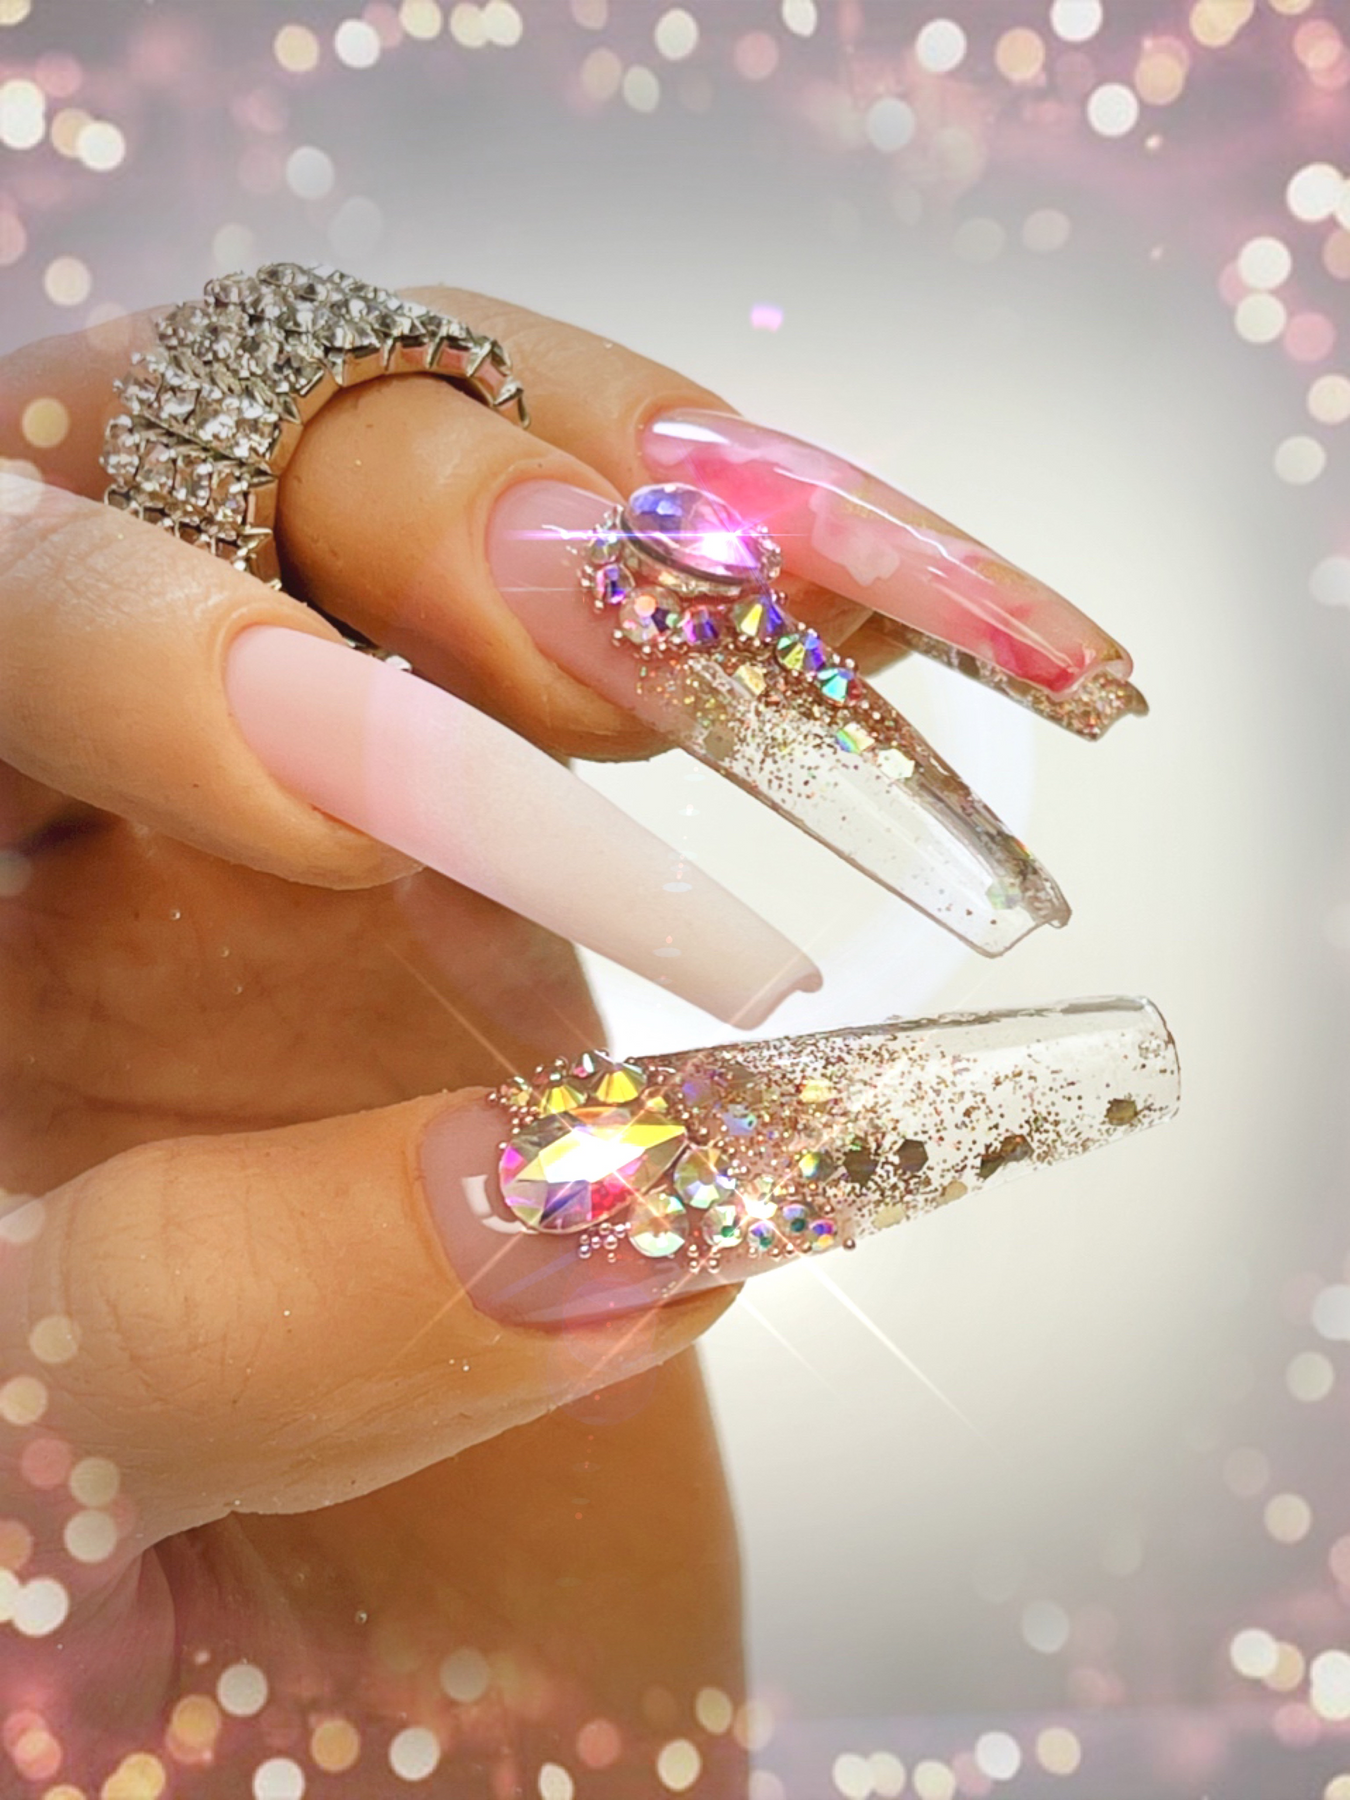 The Drip. Full Bling - Press on nails – Queen Custom Claws